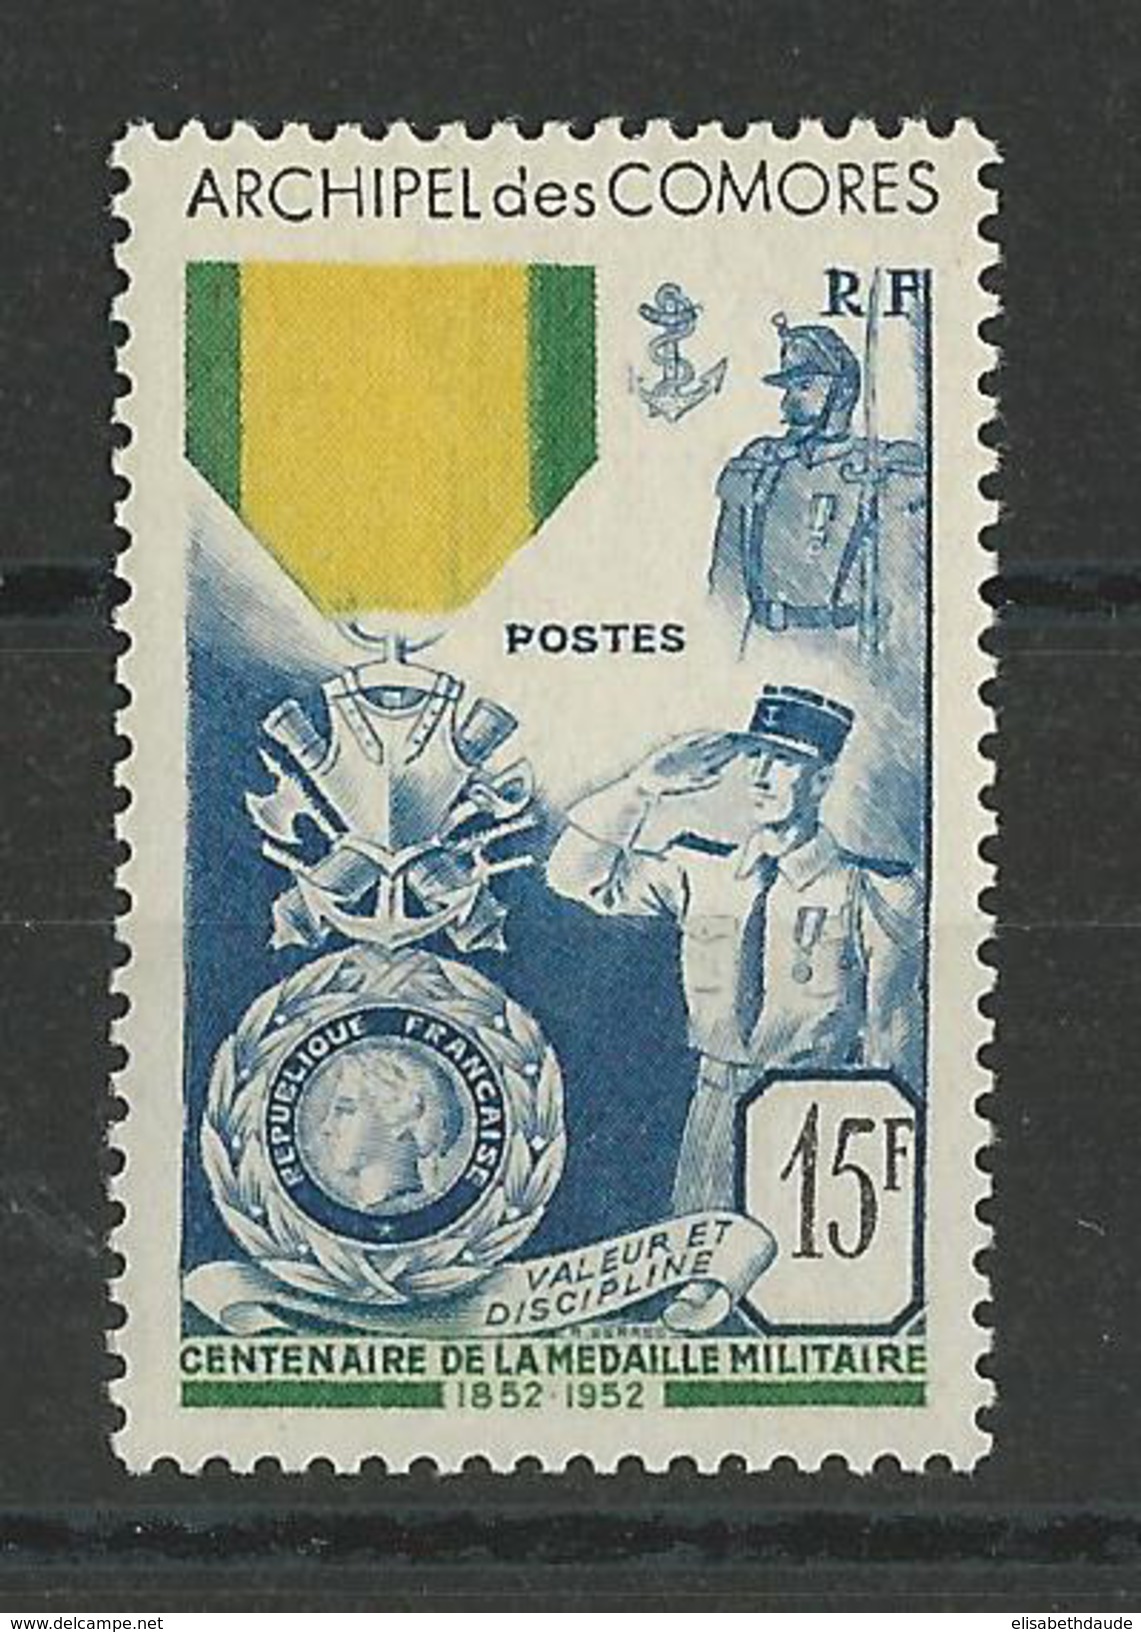 COMORES - 1952 - YVERT N°12 ** MNH - COTE = 66 EUR. - MEDAILLE MILITAIRE - Neufs